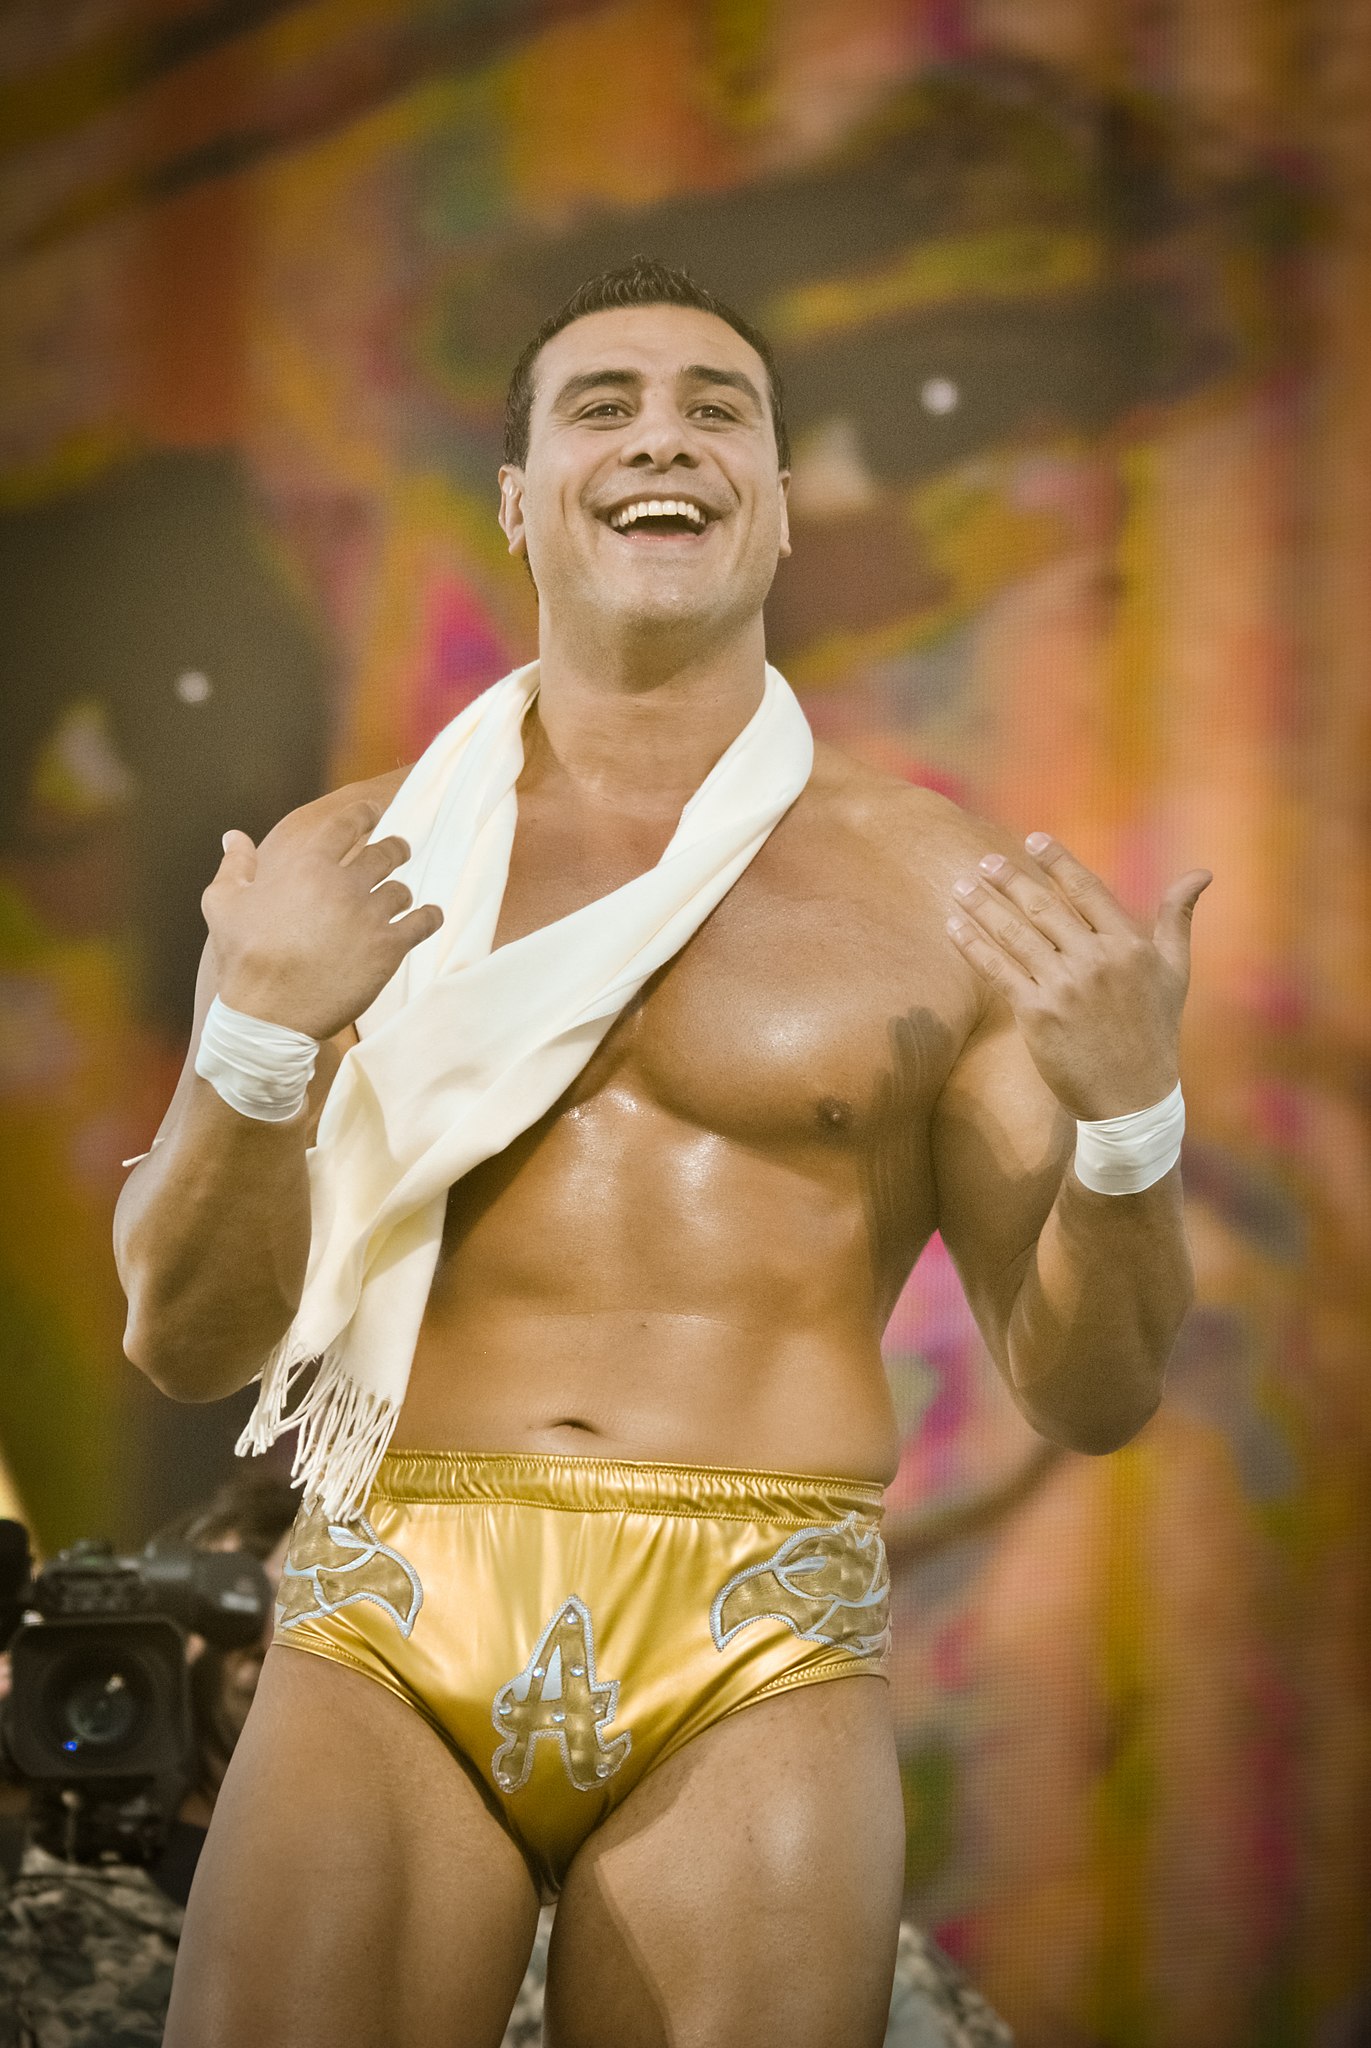 arry anggara recommends alberto del rio naked pic